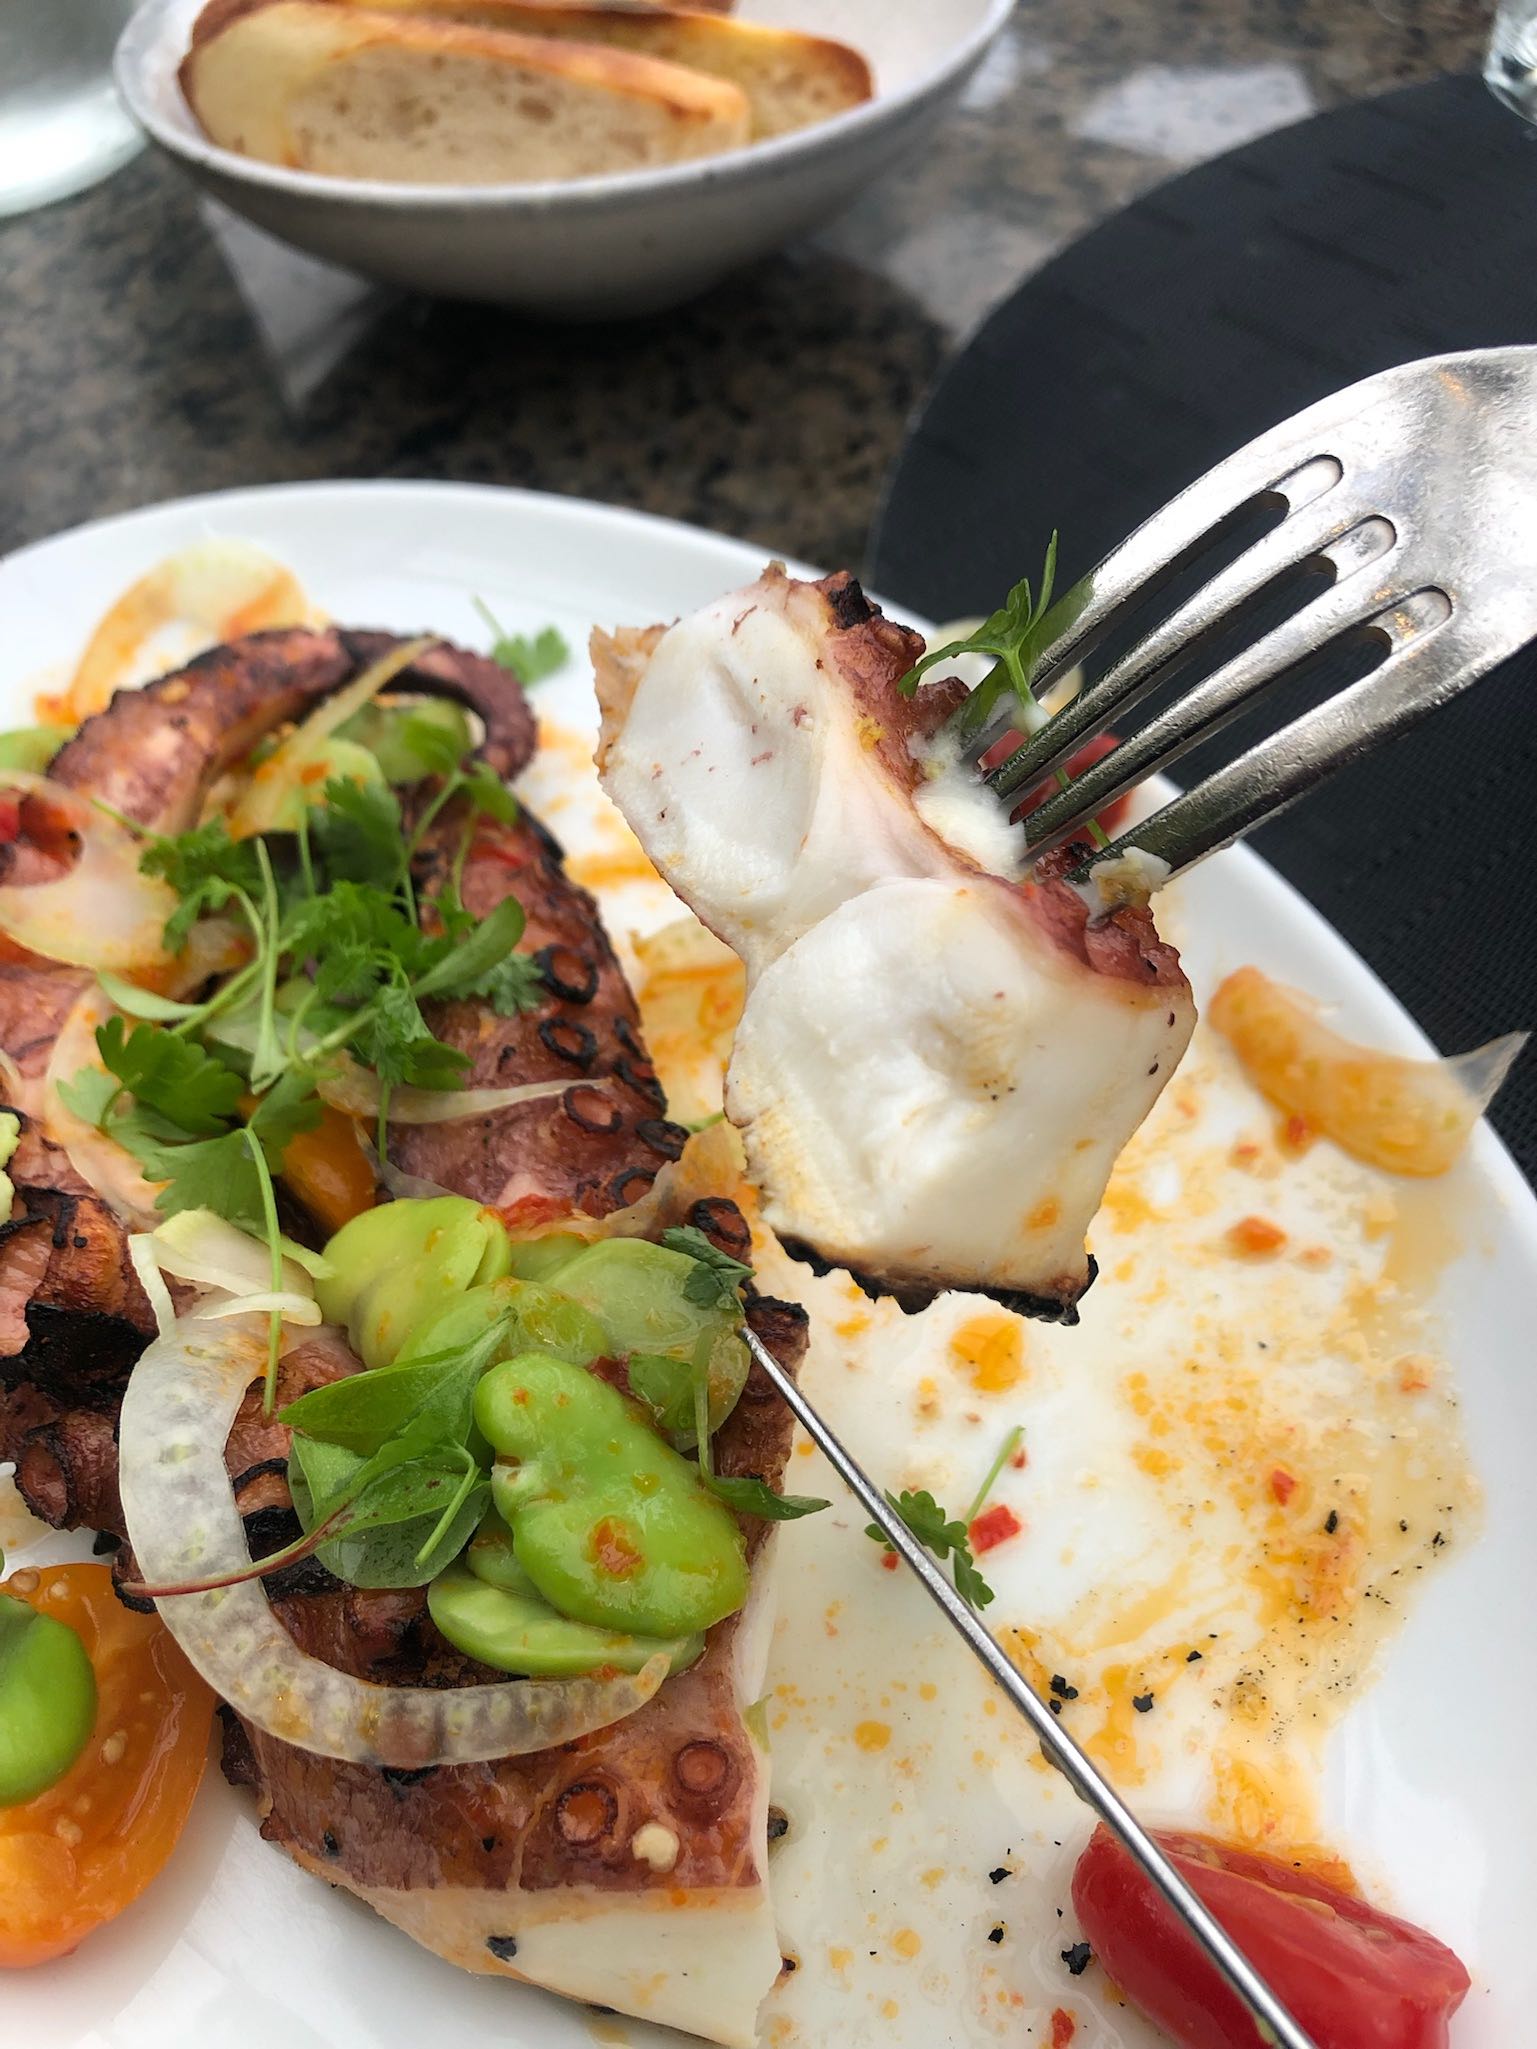 An image of the grilled octopus.